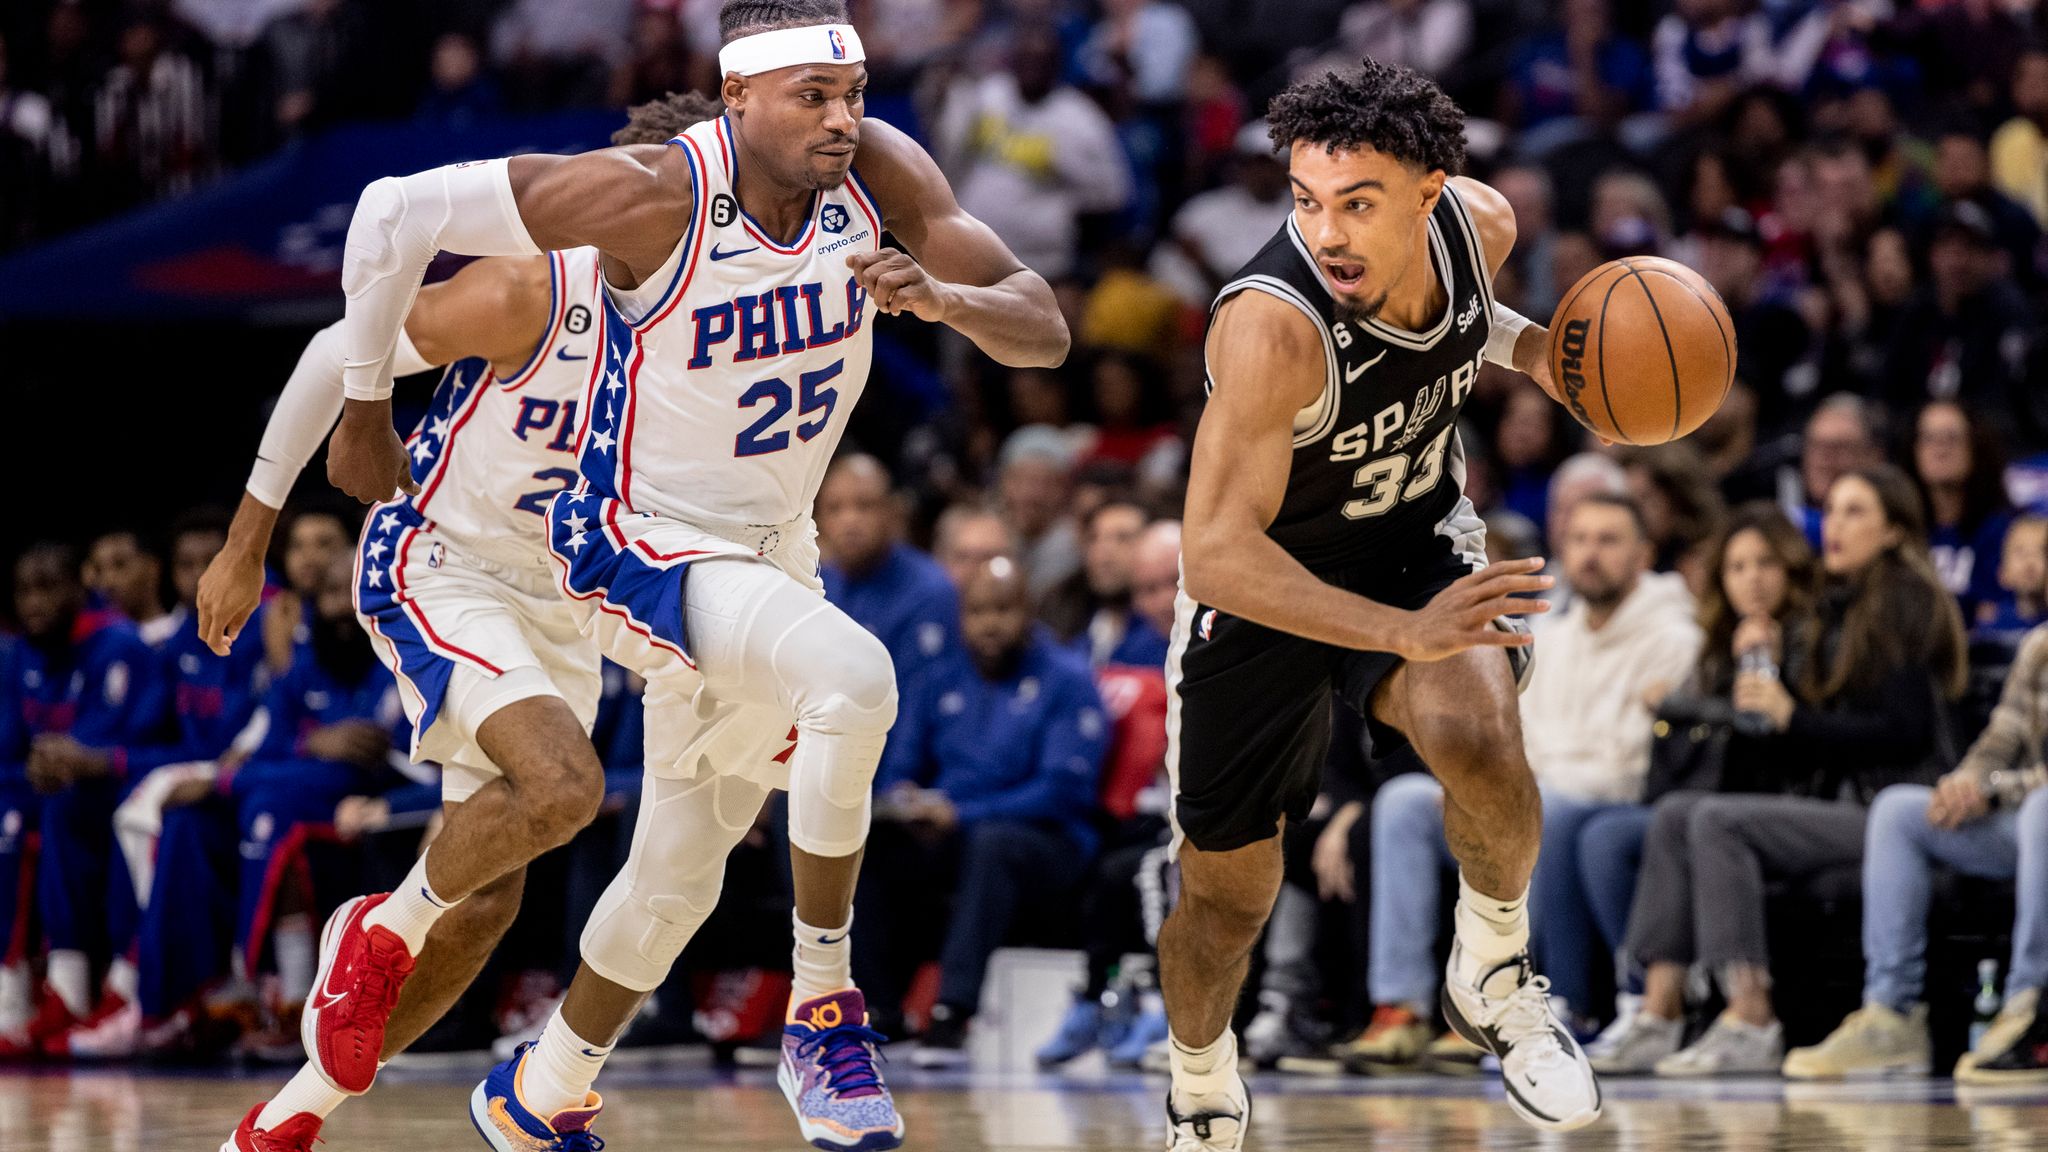 NBA on X: From The Dominican Republic ➡️ to finishing high